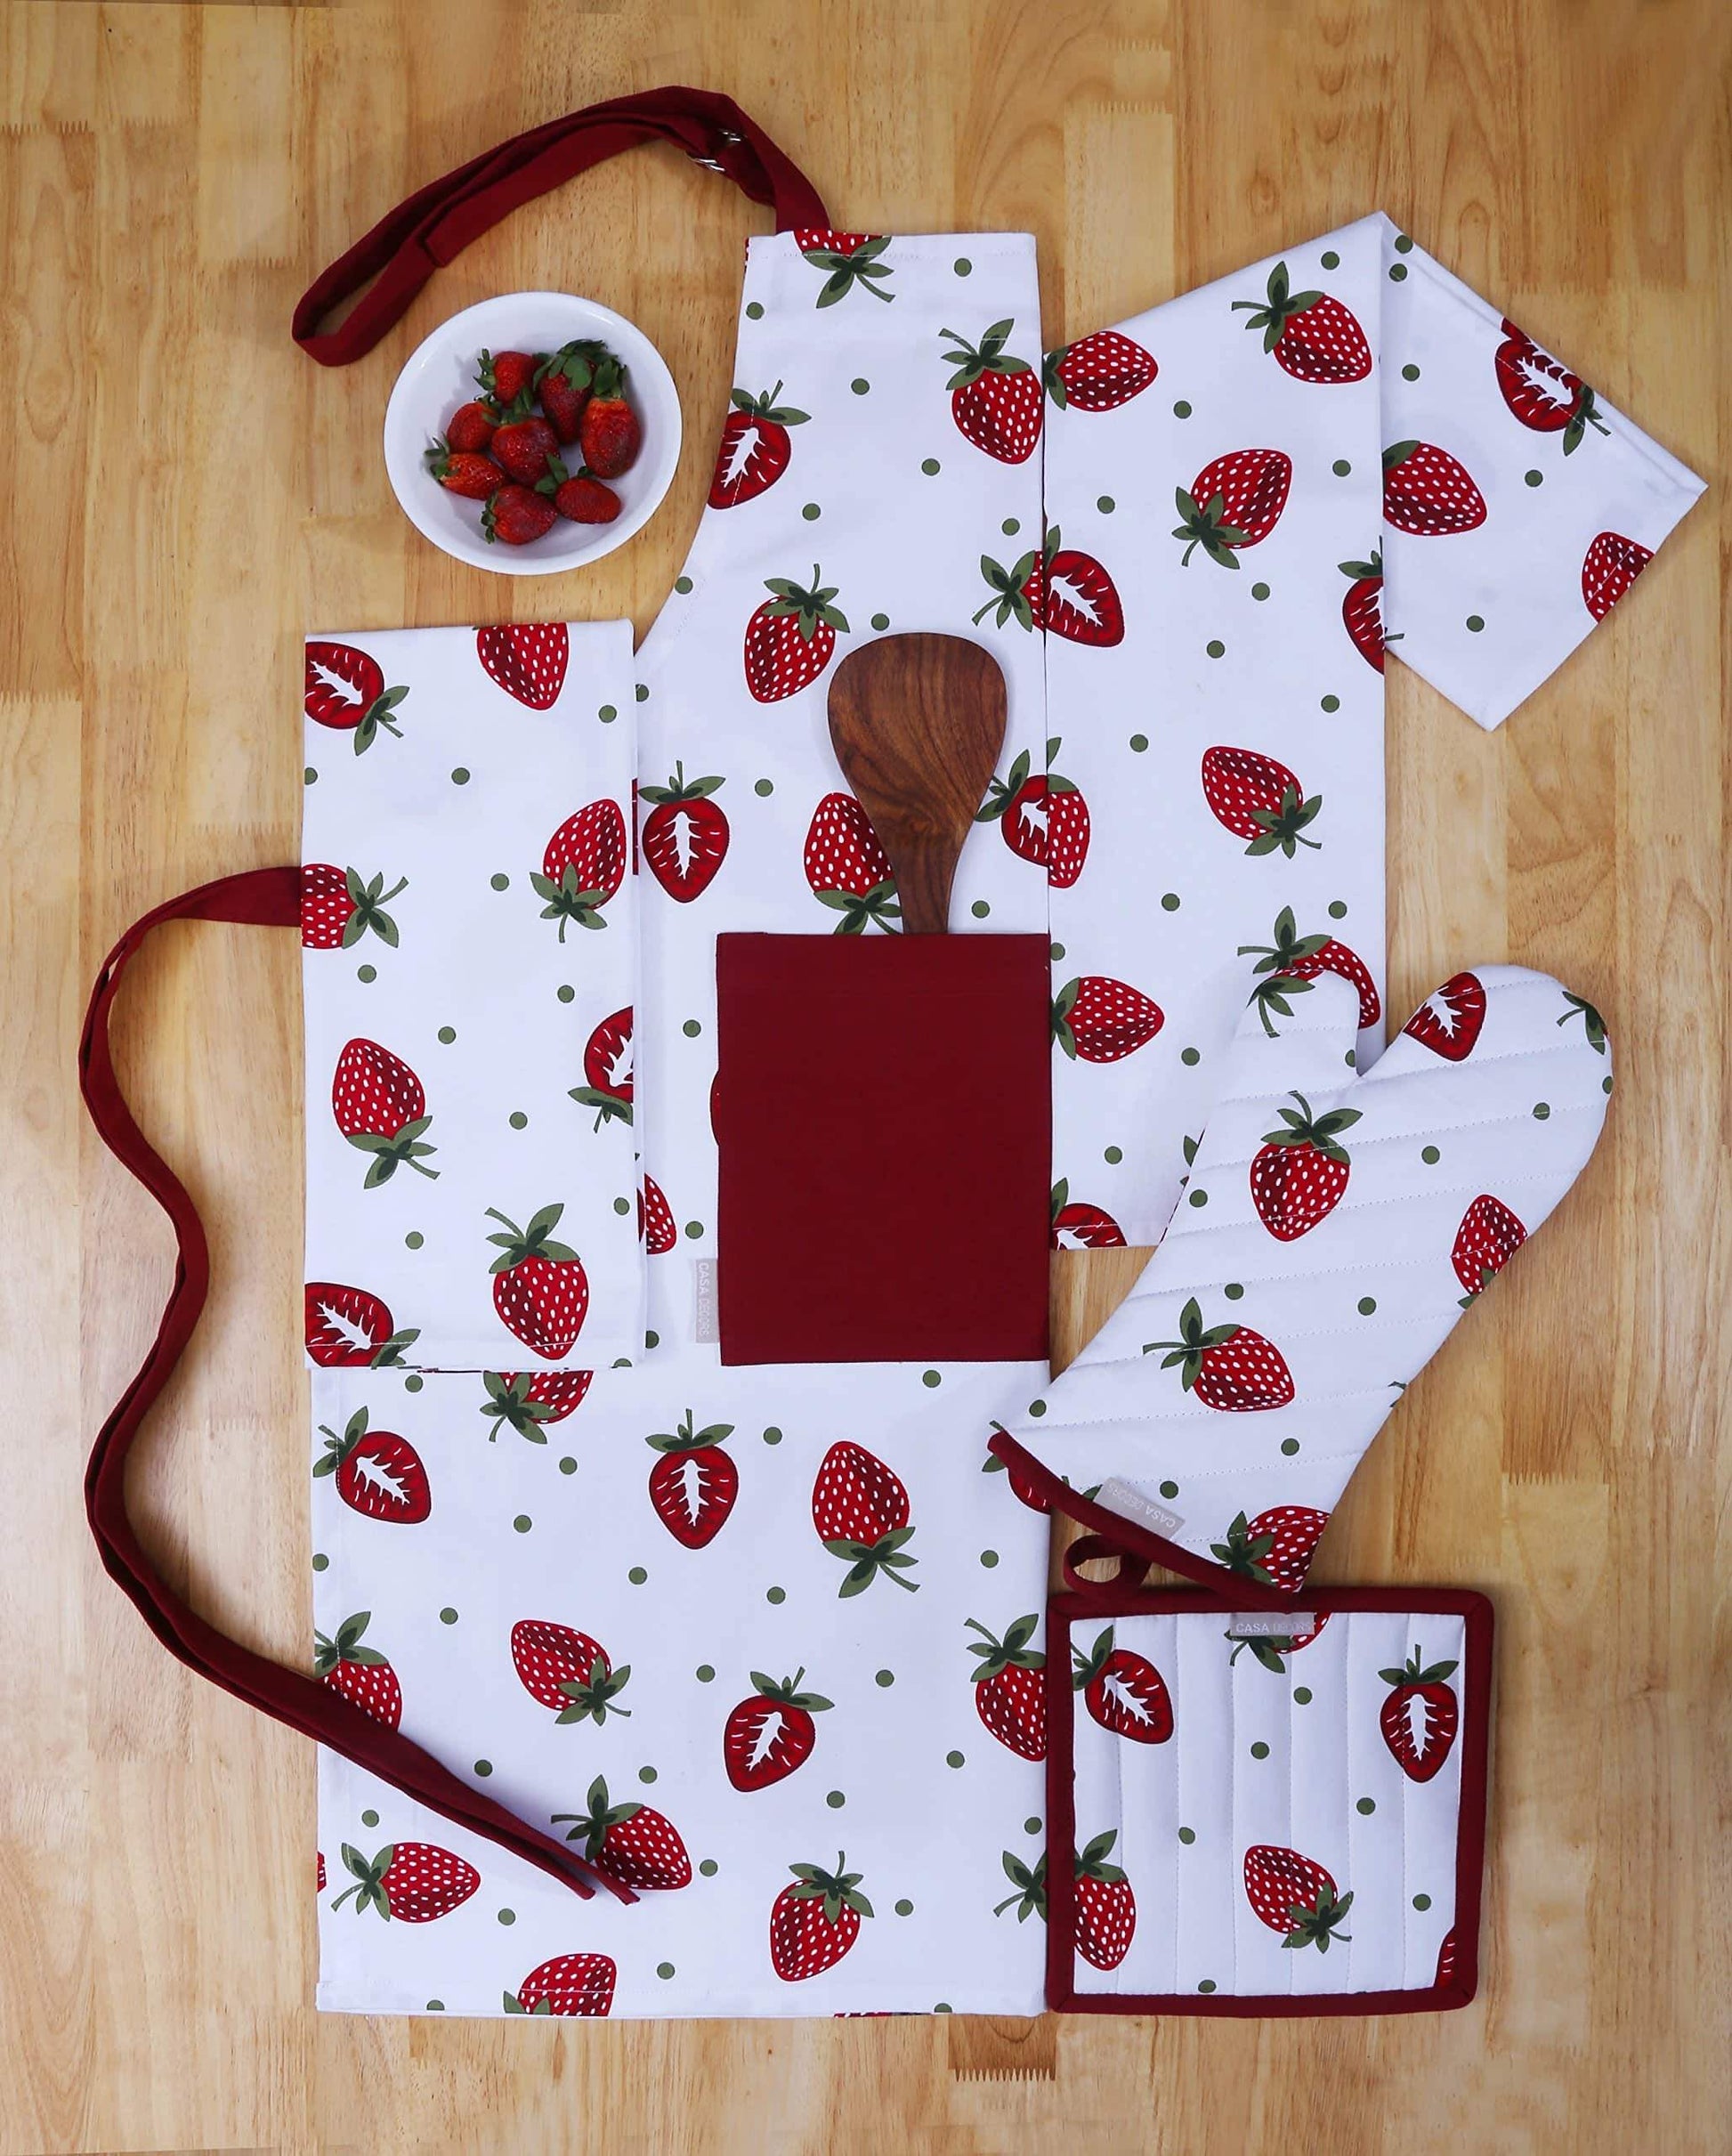 On amazon casa decors set of apron oven mitt pot holder pair of kitchen towels in a unique berry blast design made of 100 cotton eco friendly safe value pack and ideal gift set kitchen linen set